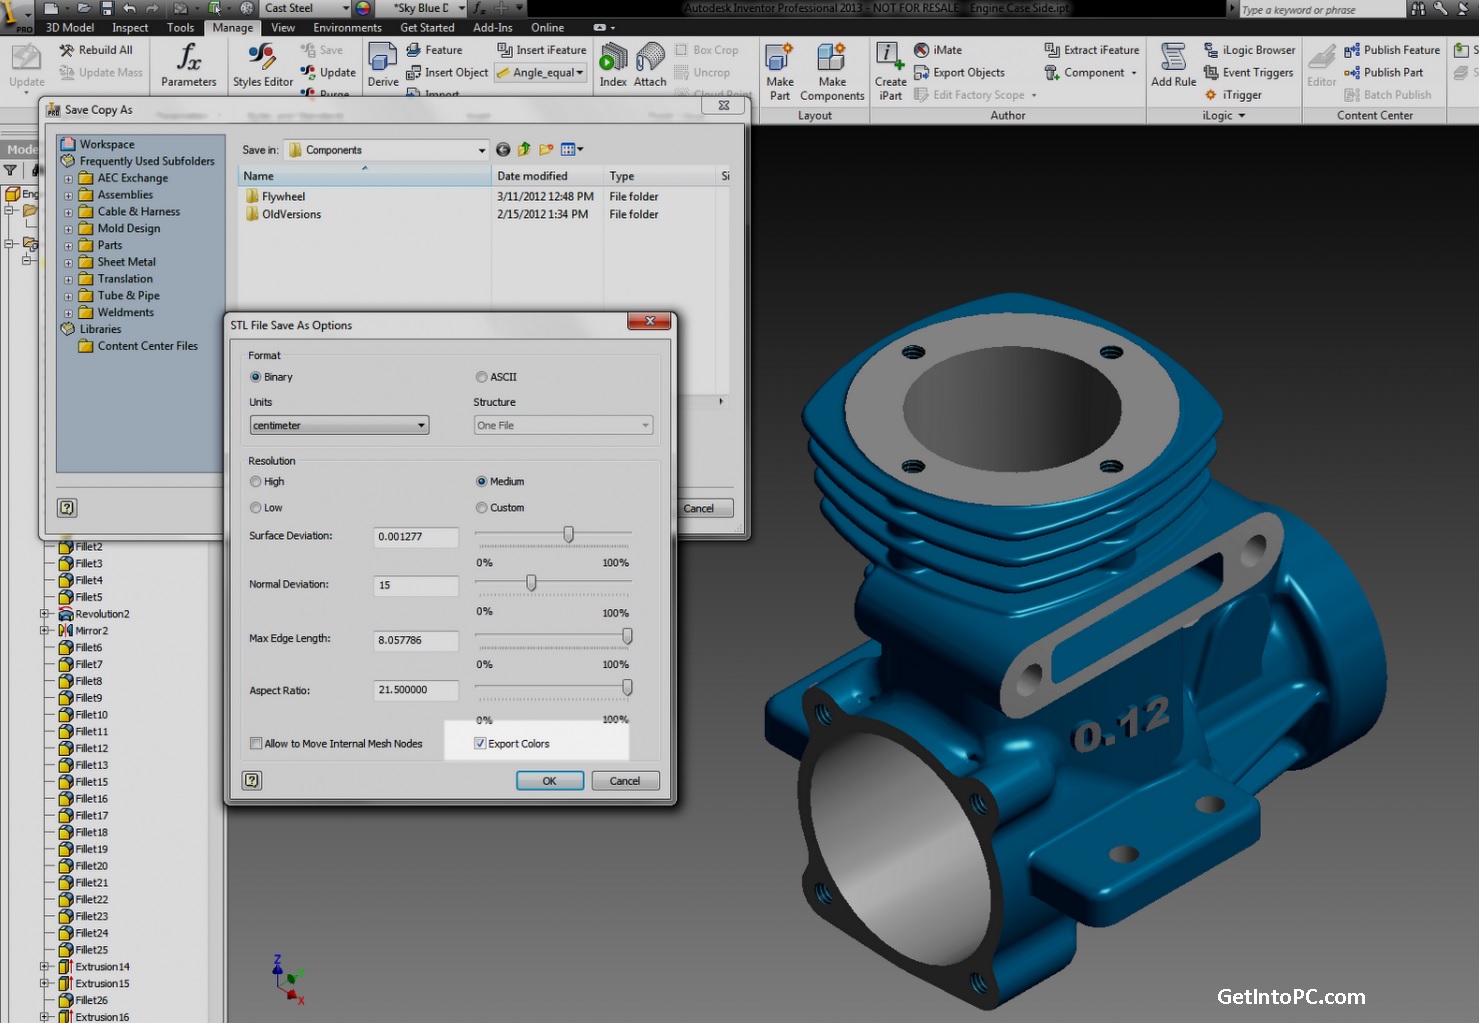 autodesk inventor for mac free download